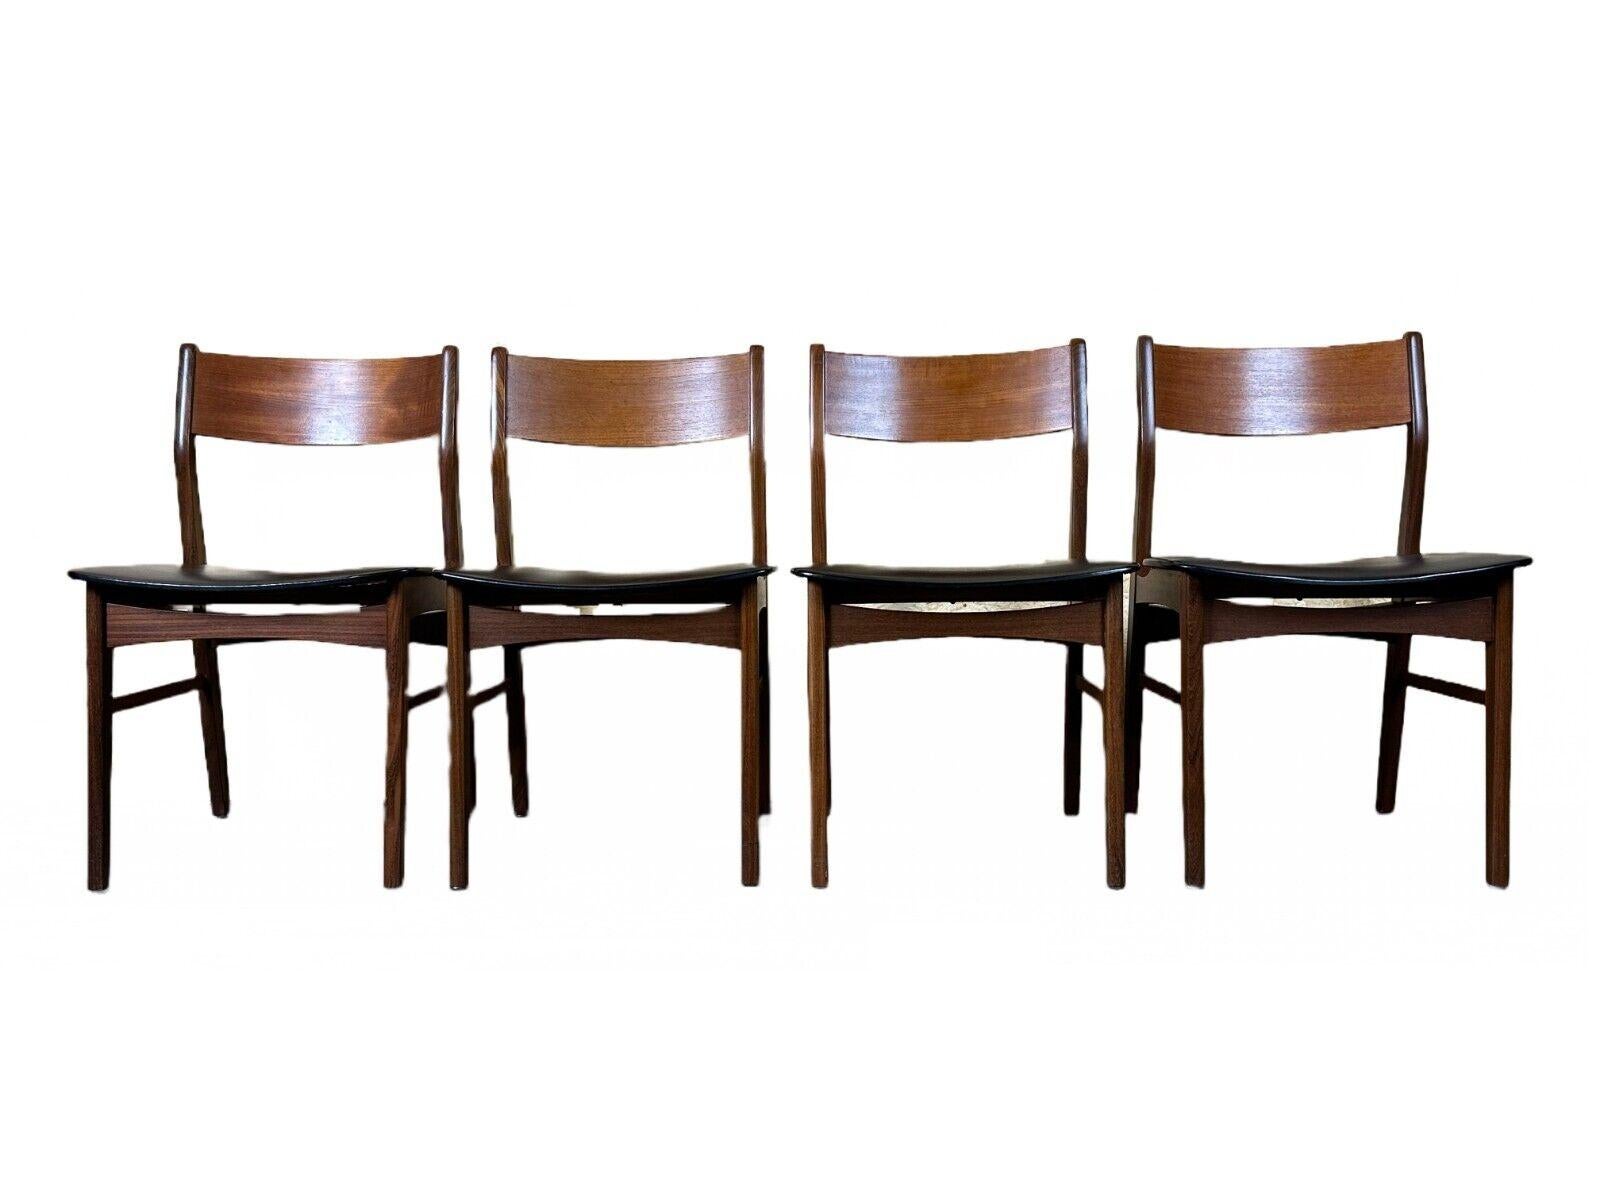 4x 60s 70s Teak Chair Dining Chair Danish Modern Design Denmark

Object: 4x chair

Manufacturer:

Condition: good

Age: around 1960-1970

Dimensions:

Width = 49cm
Depth = 47cm
Height = 79cm
Seat height = 43.5cm

Material: teak, faux leather

Other